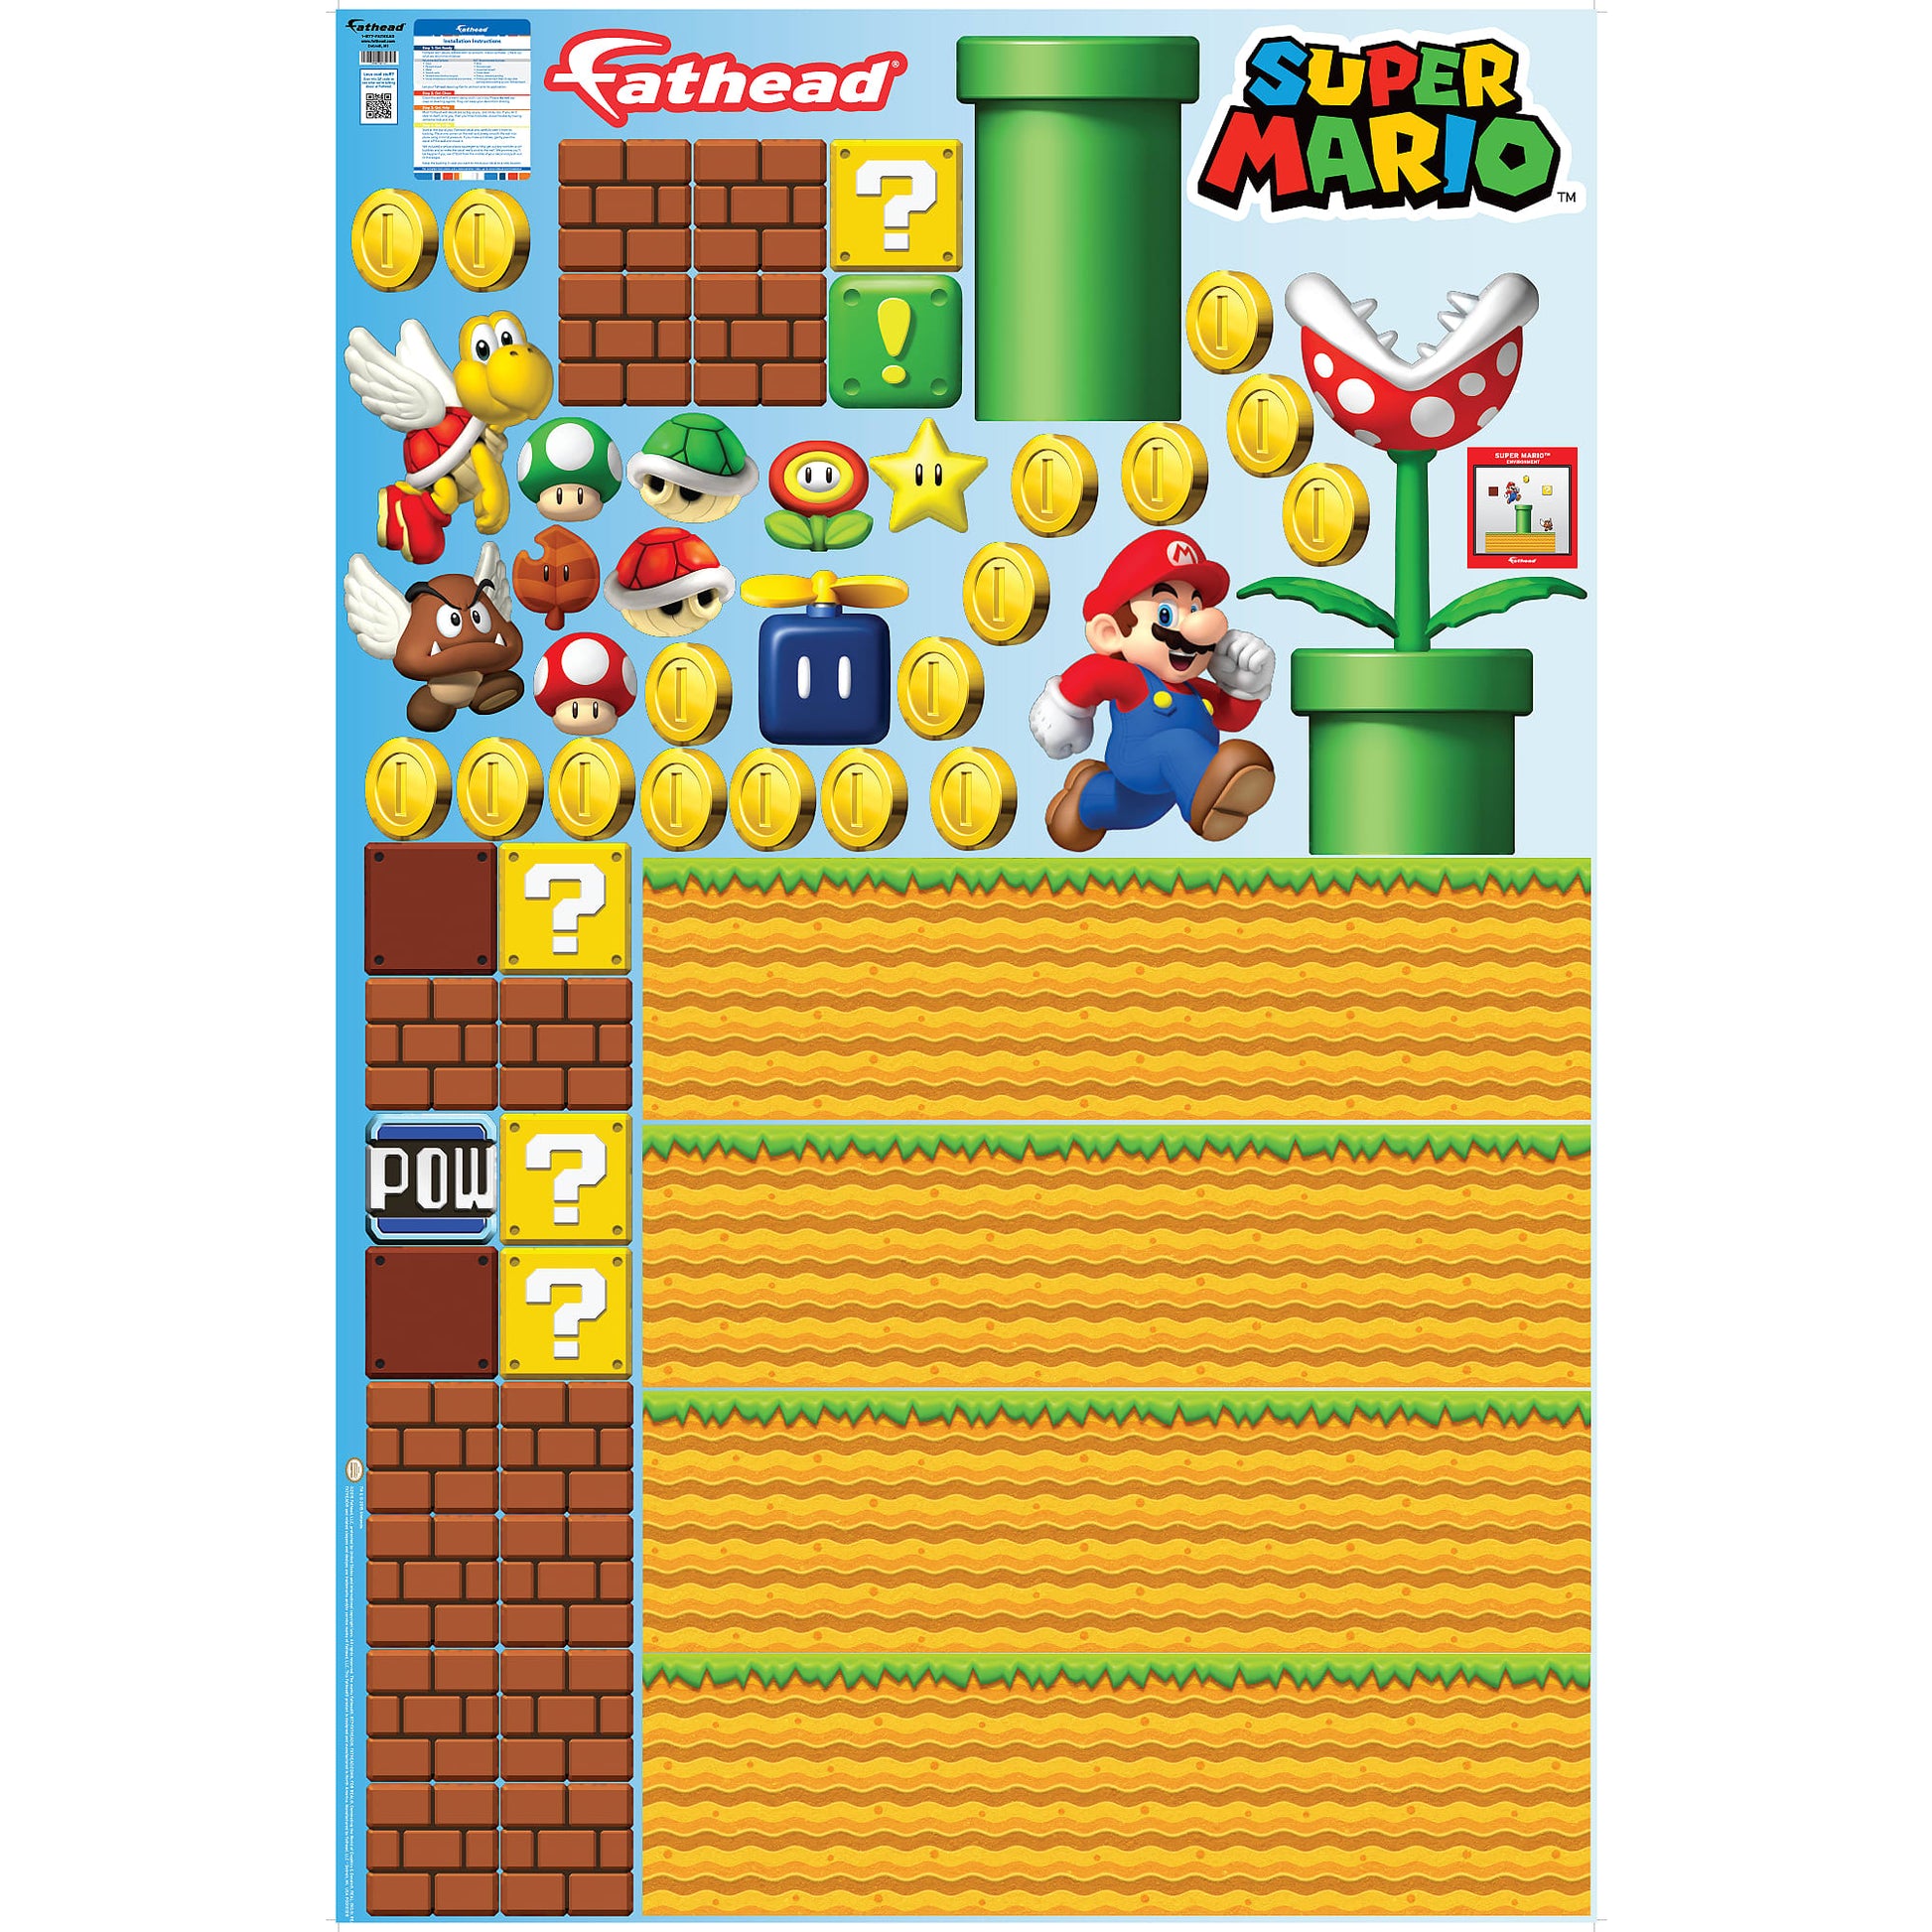 The Game of Life: Super Mario™ Edition - Merchandise - Nintendo Official  Site